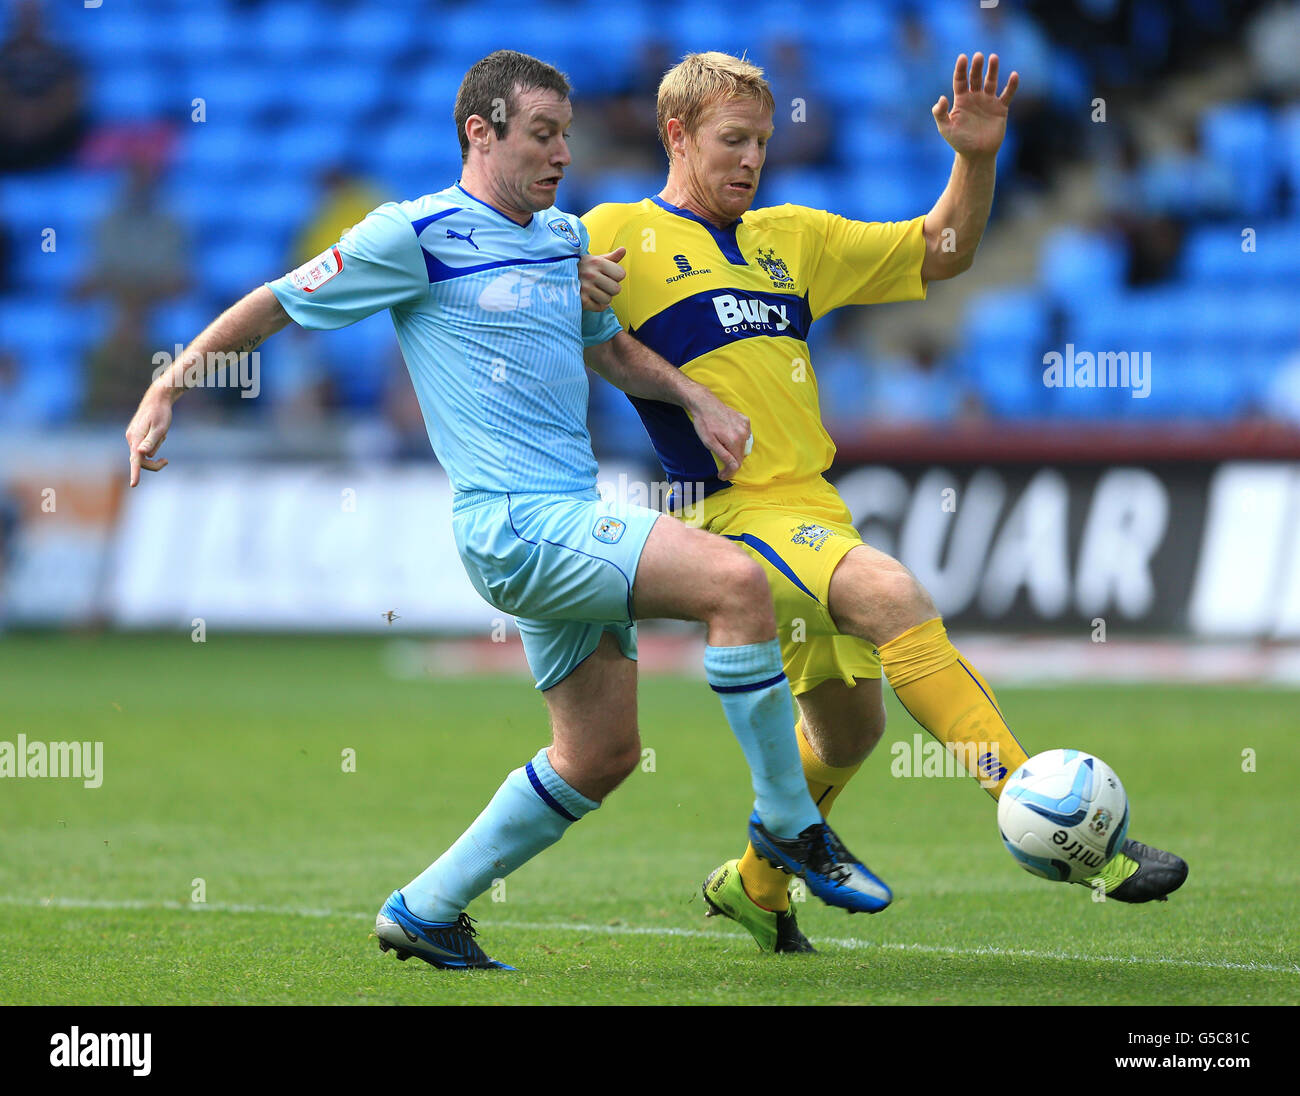 Coventry City's Stephen Elliott and Bury's Adam Lockwood (right) in action during the npower Football League One match at the Ricoh Arena, Coventry. Stock Photo